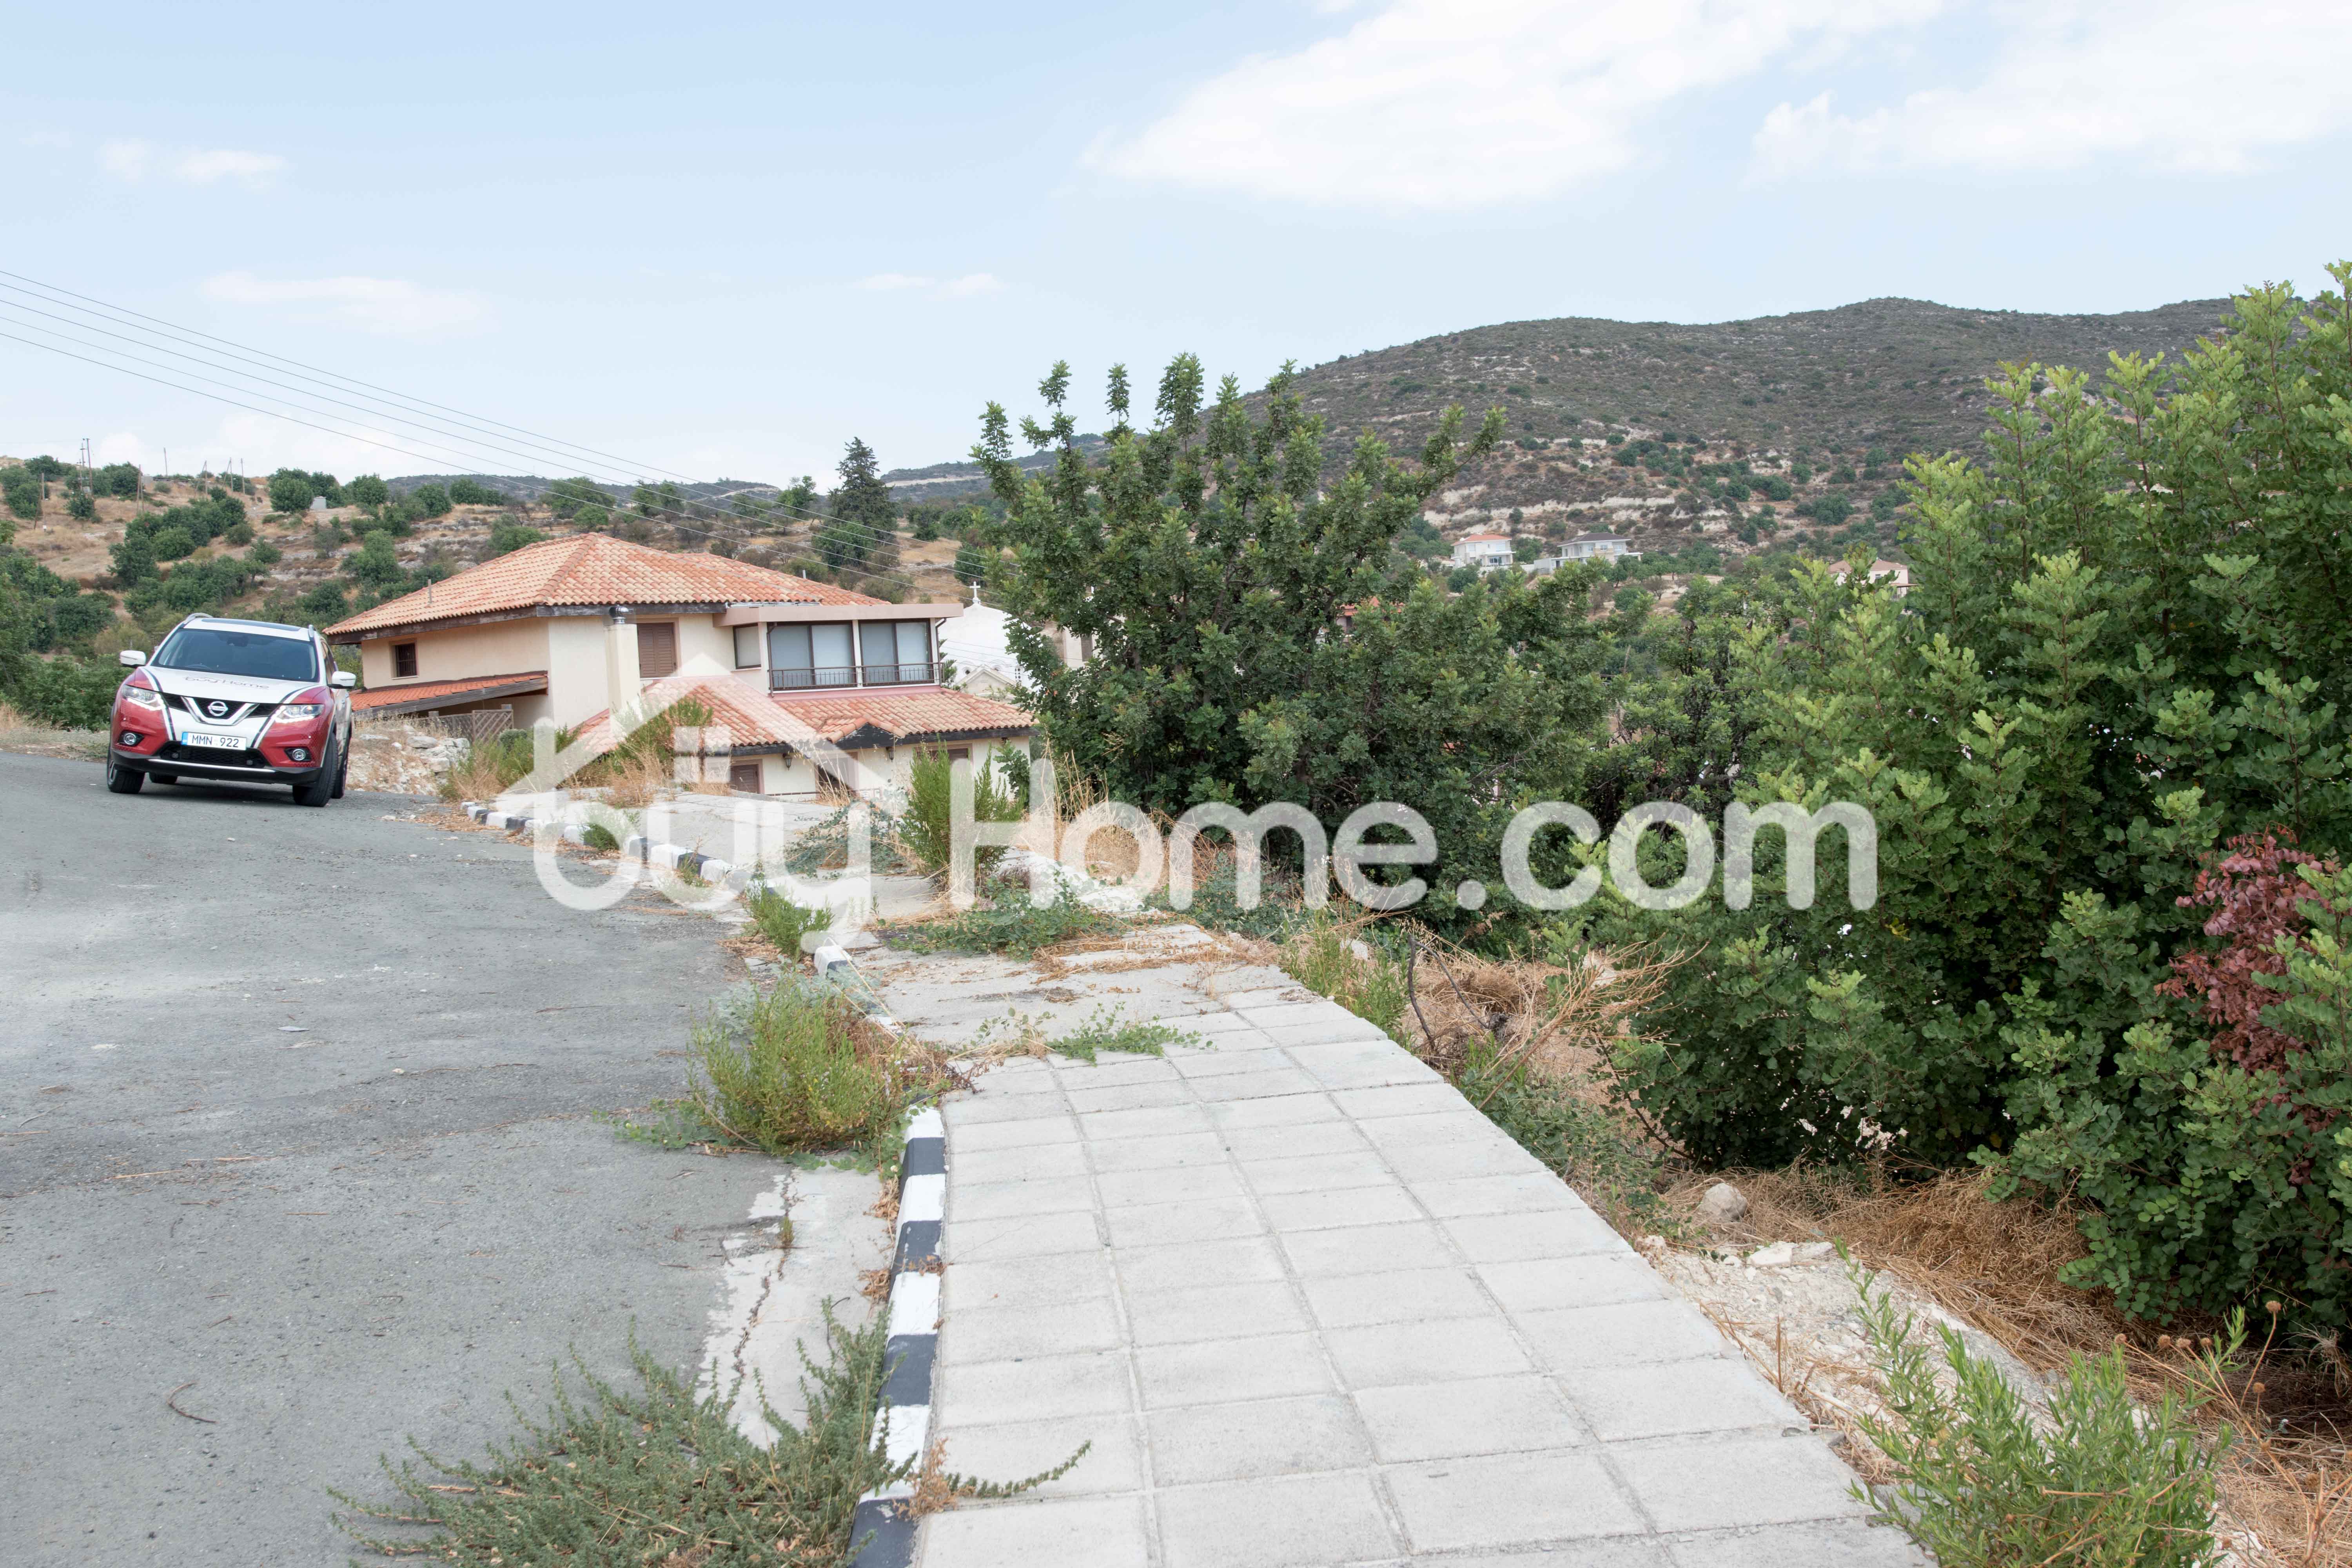 Small Plot In Fasoula | BuyHome